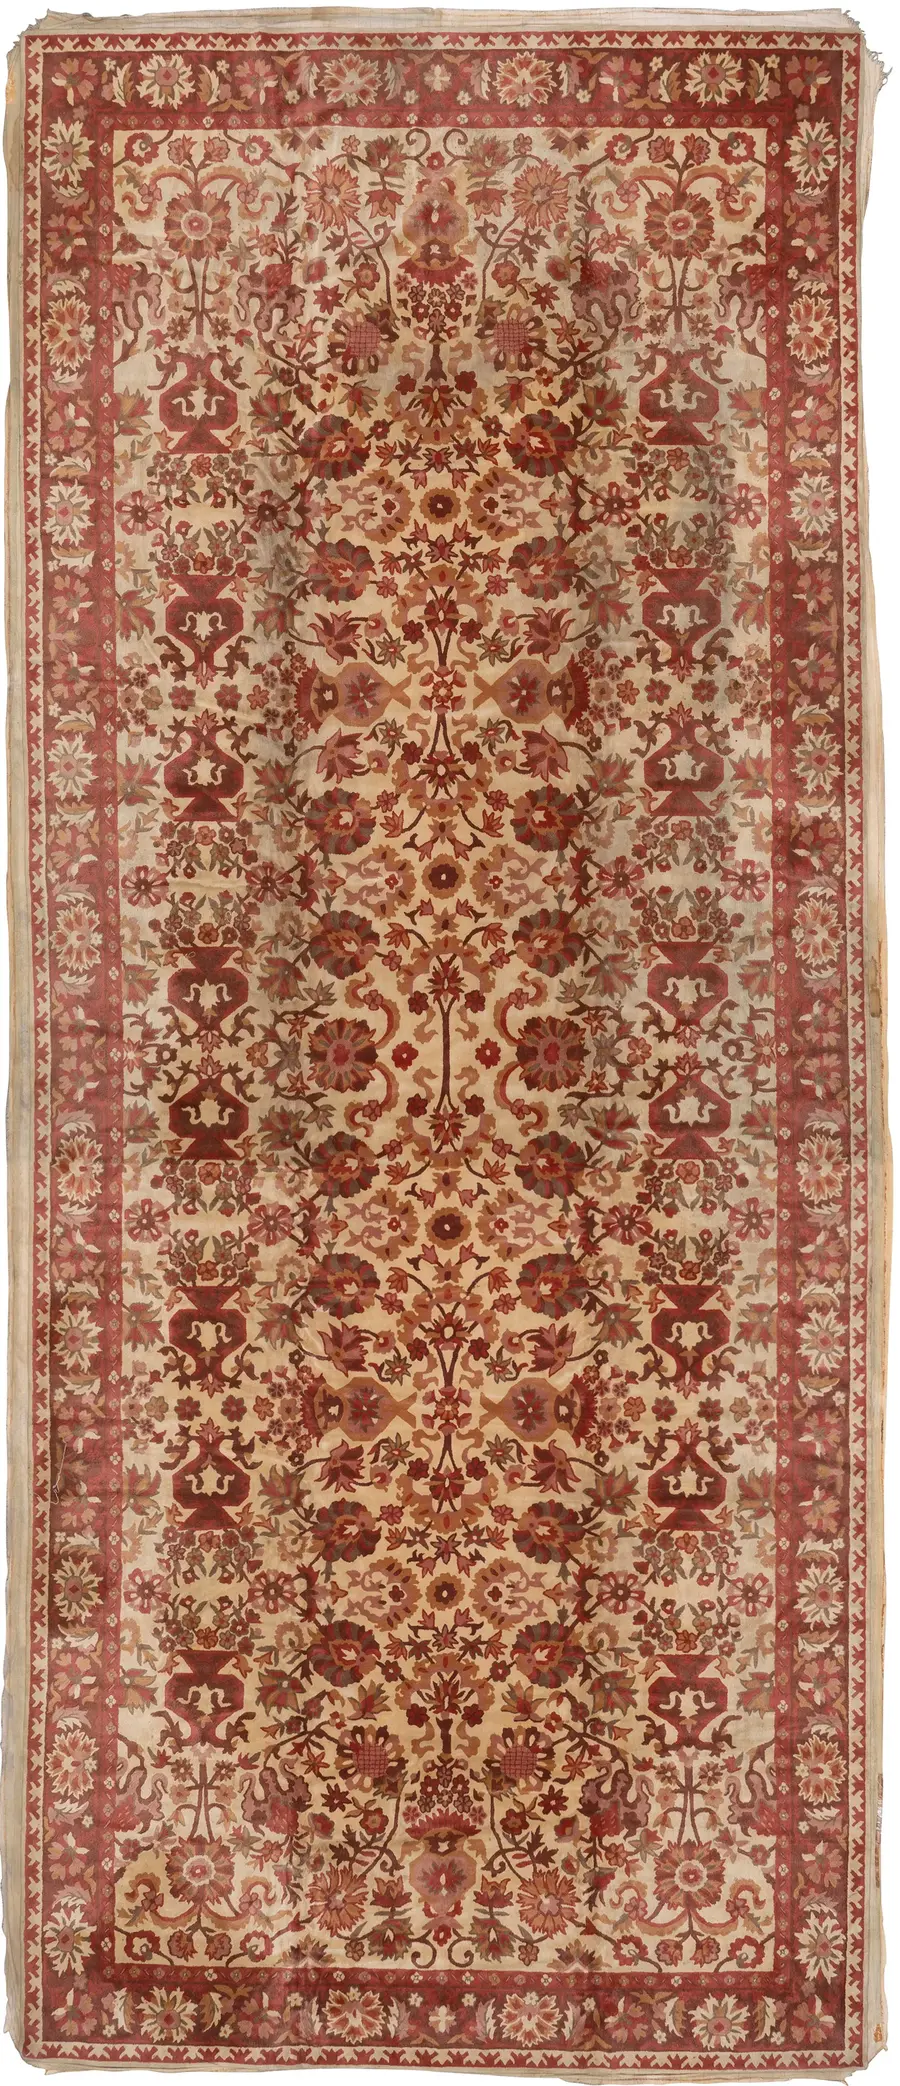 other rugs